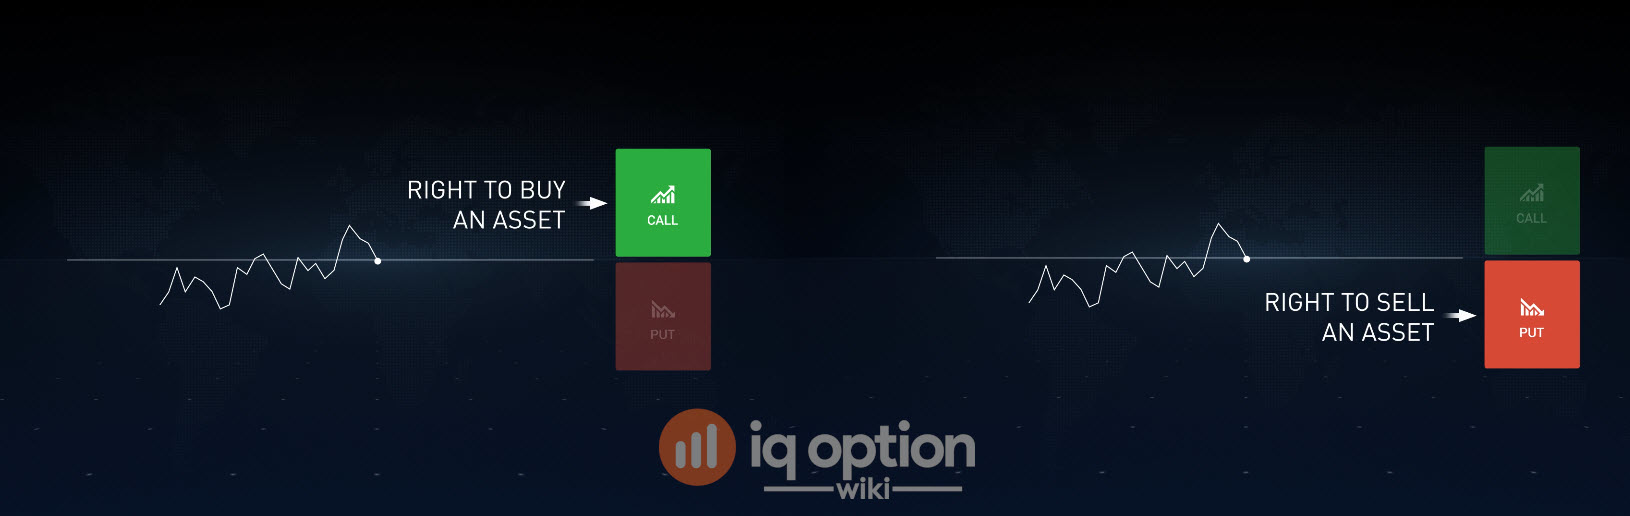 The Different Types of Options on the IQ option platform - IQ Option Wiki